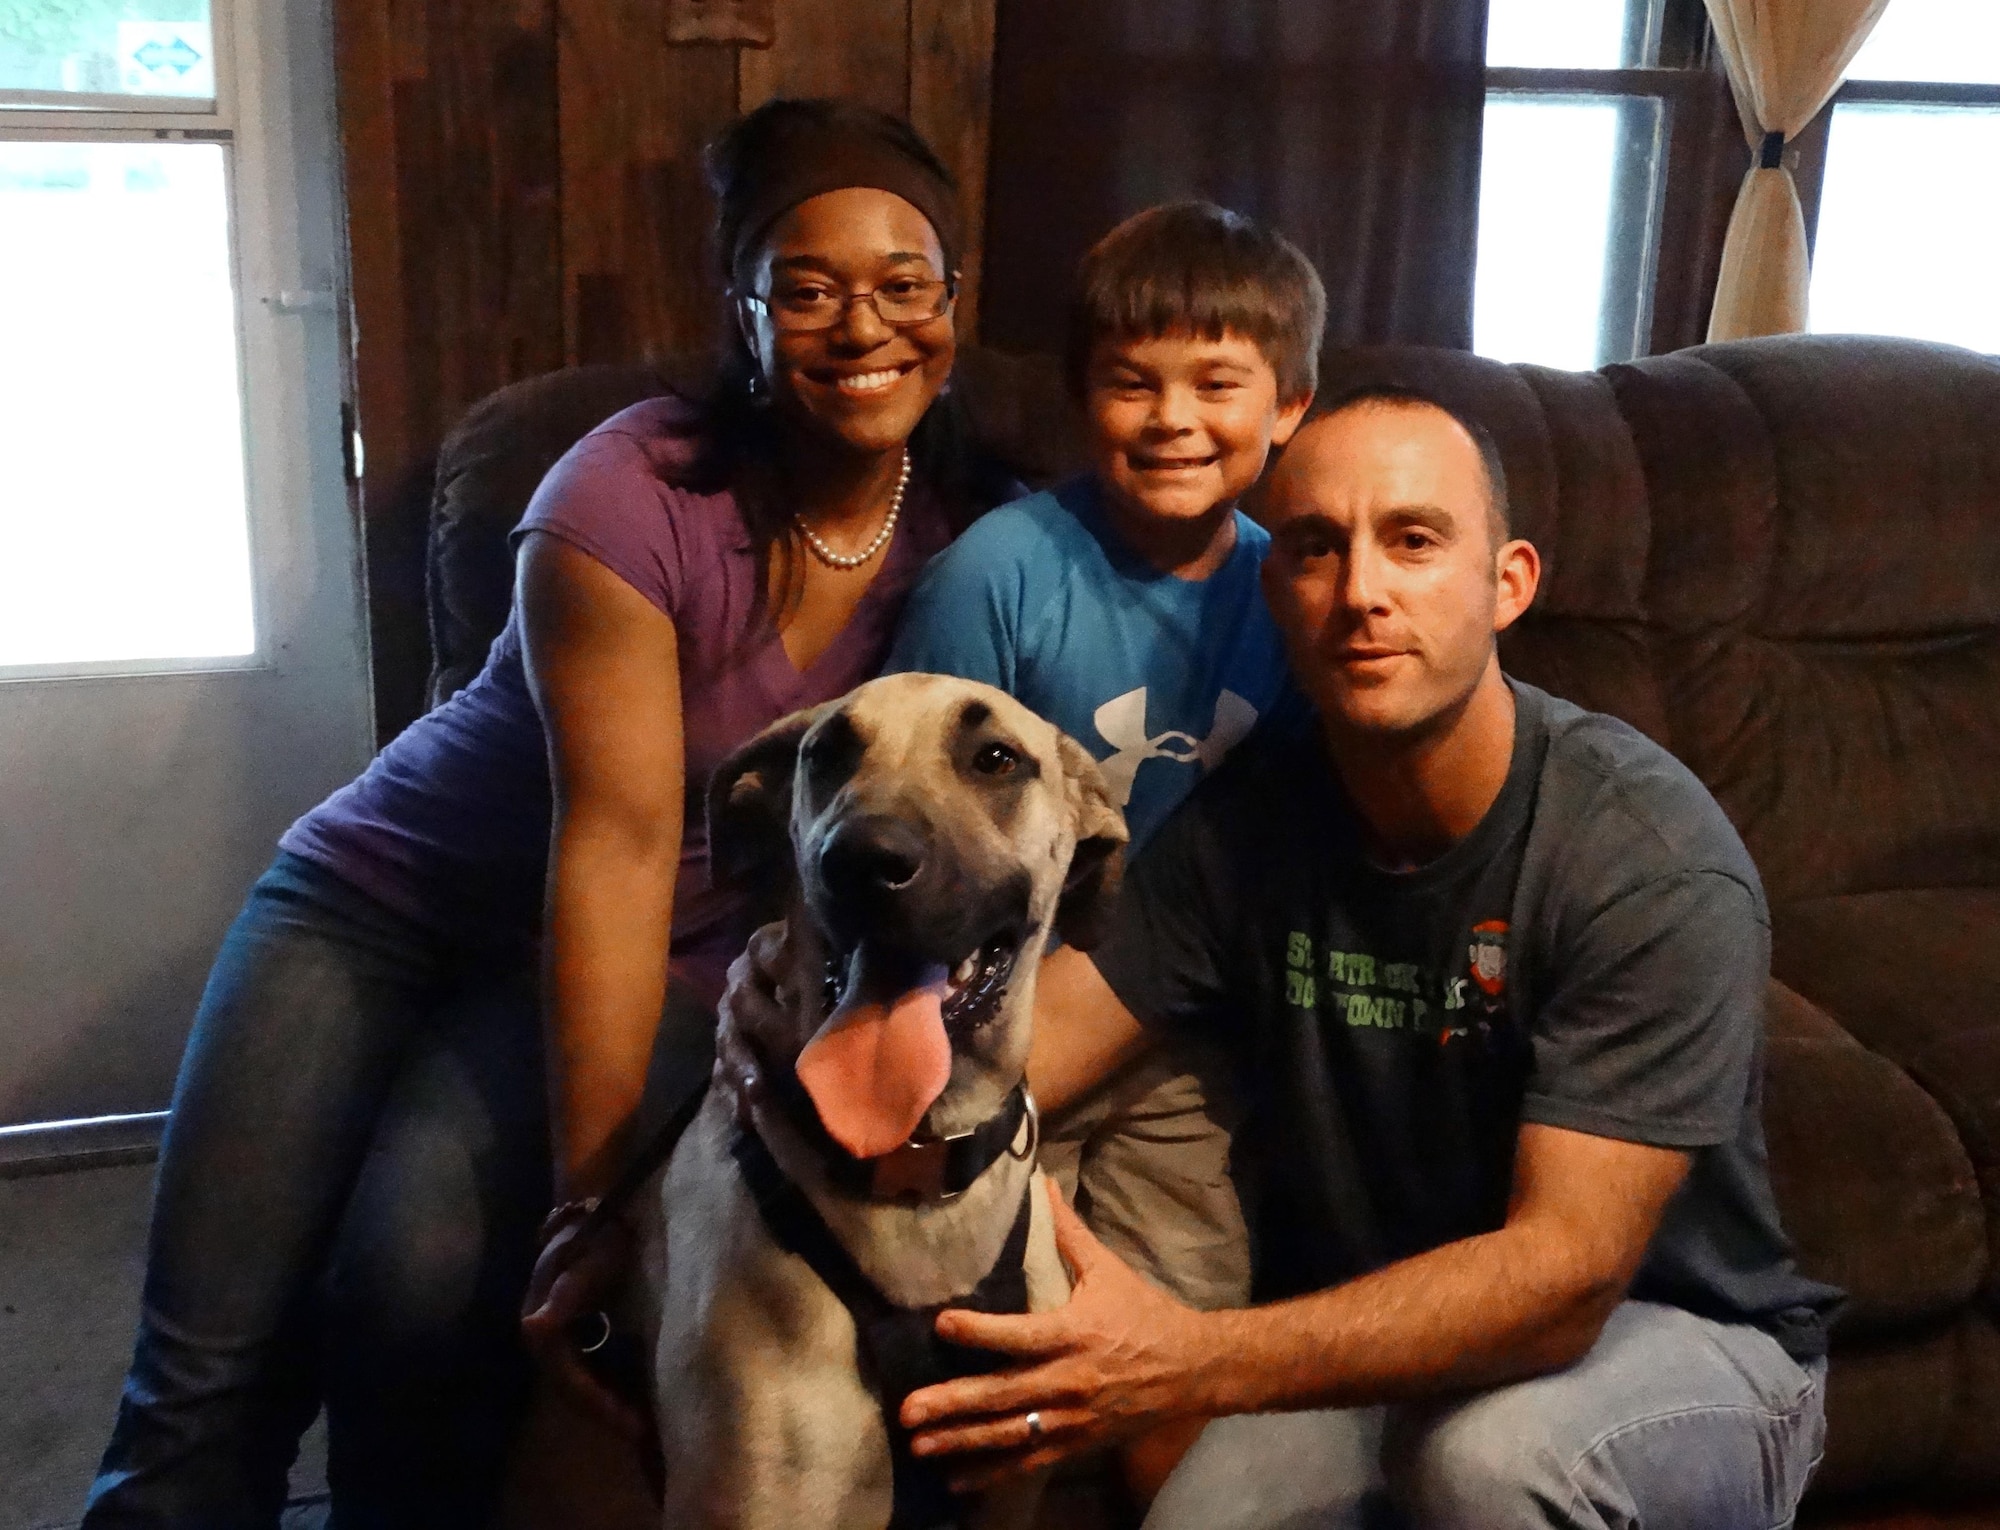 U.S. Air Force Capt. Justin Cassidy, the 13th Aircraft Maintenance Unit officer in charge, and Capt. Renee Cassidy, the 509th Maintenance Operations officer in charge, gather for a family photo with their son, Carson, and their Great Dane. (Courtesy photo)